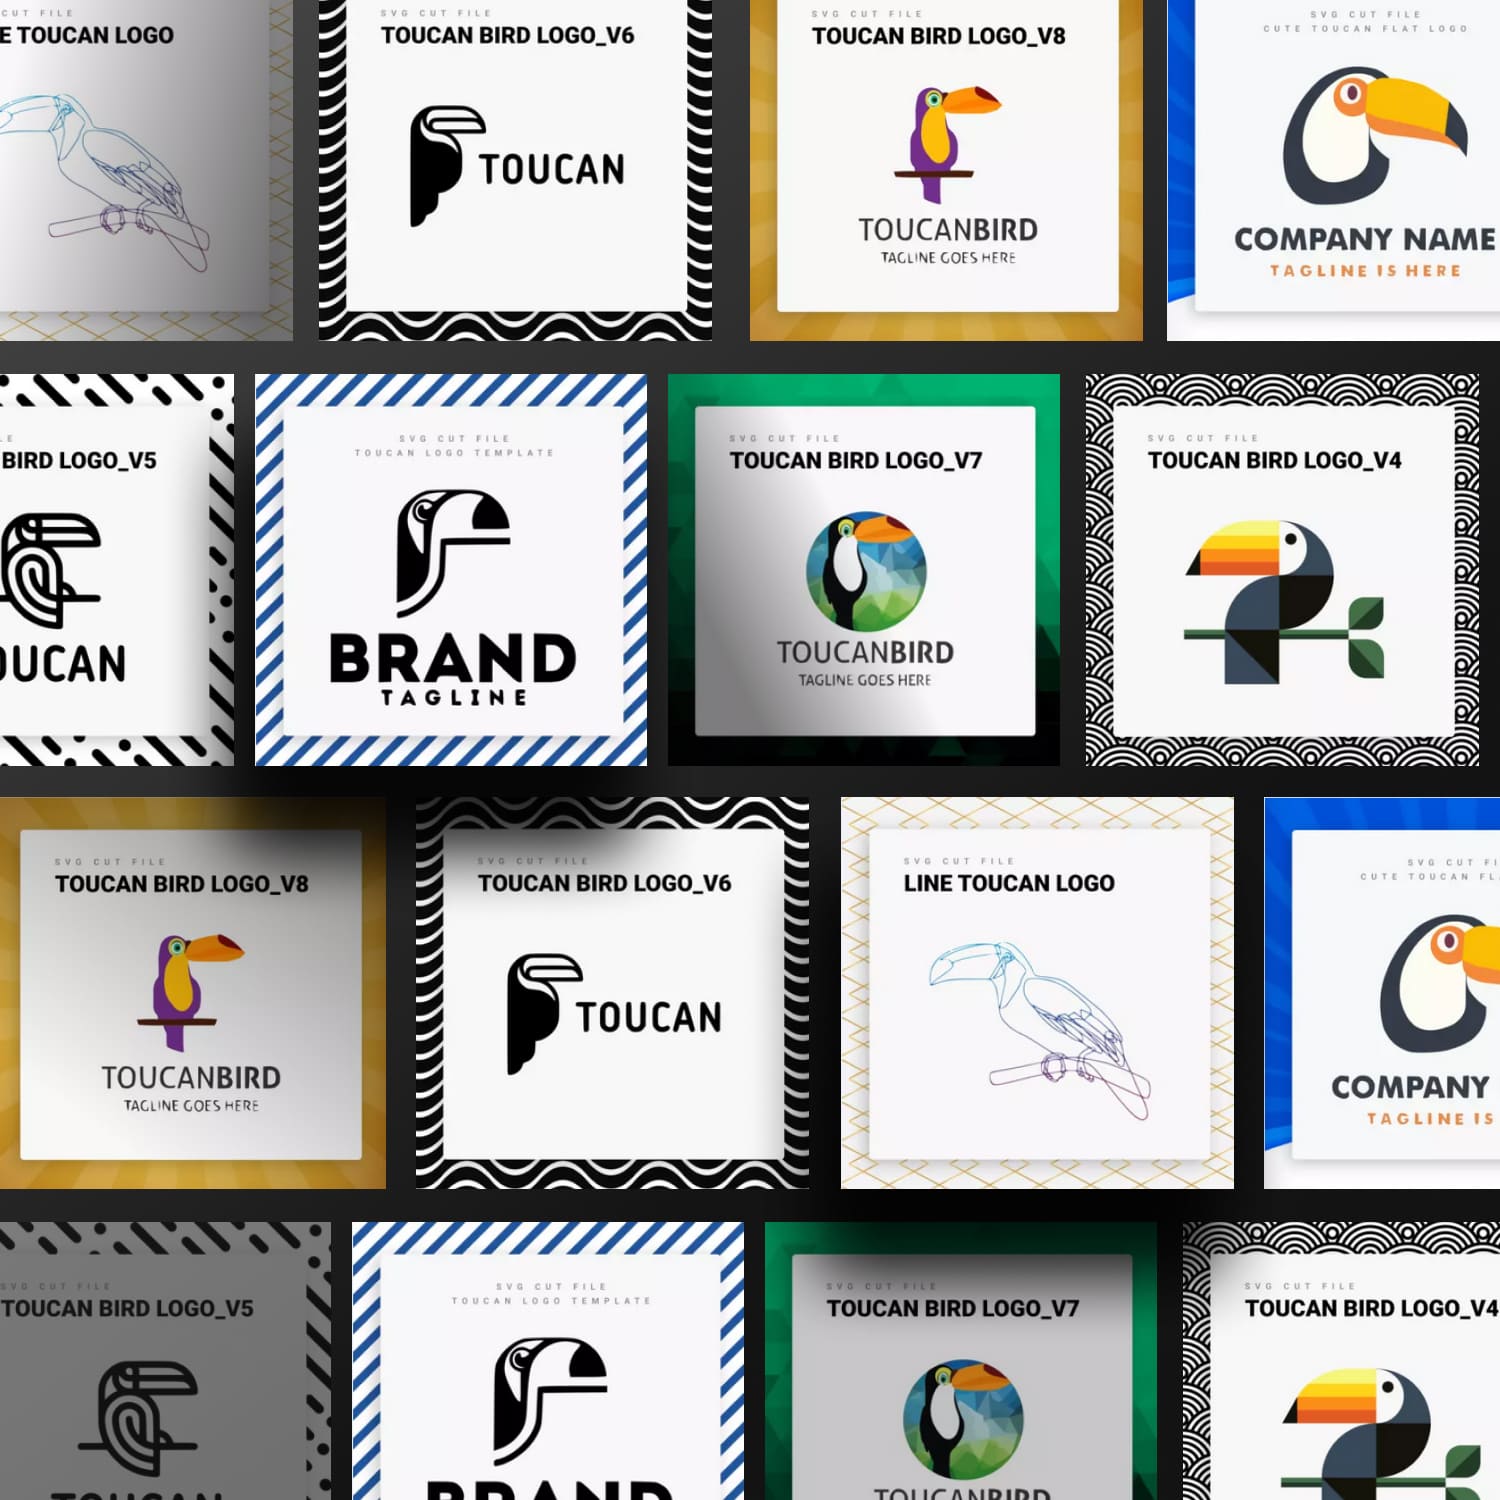 Bunch of business cards with a toucan logo on them.